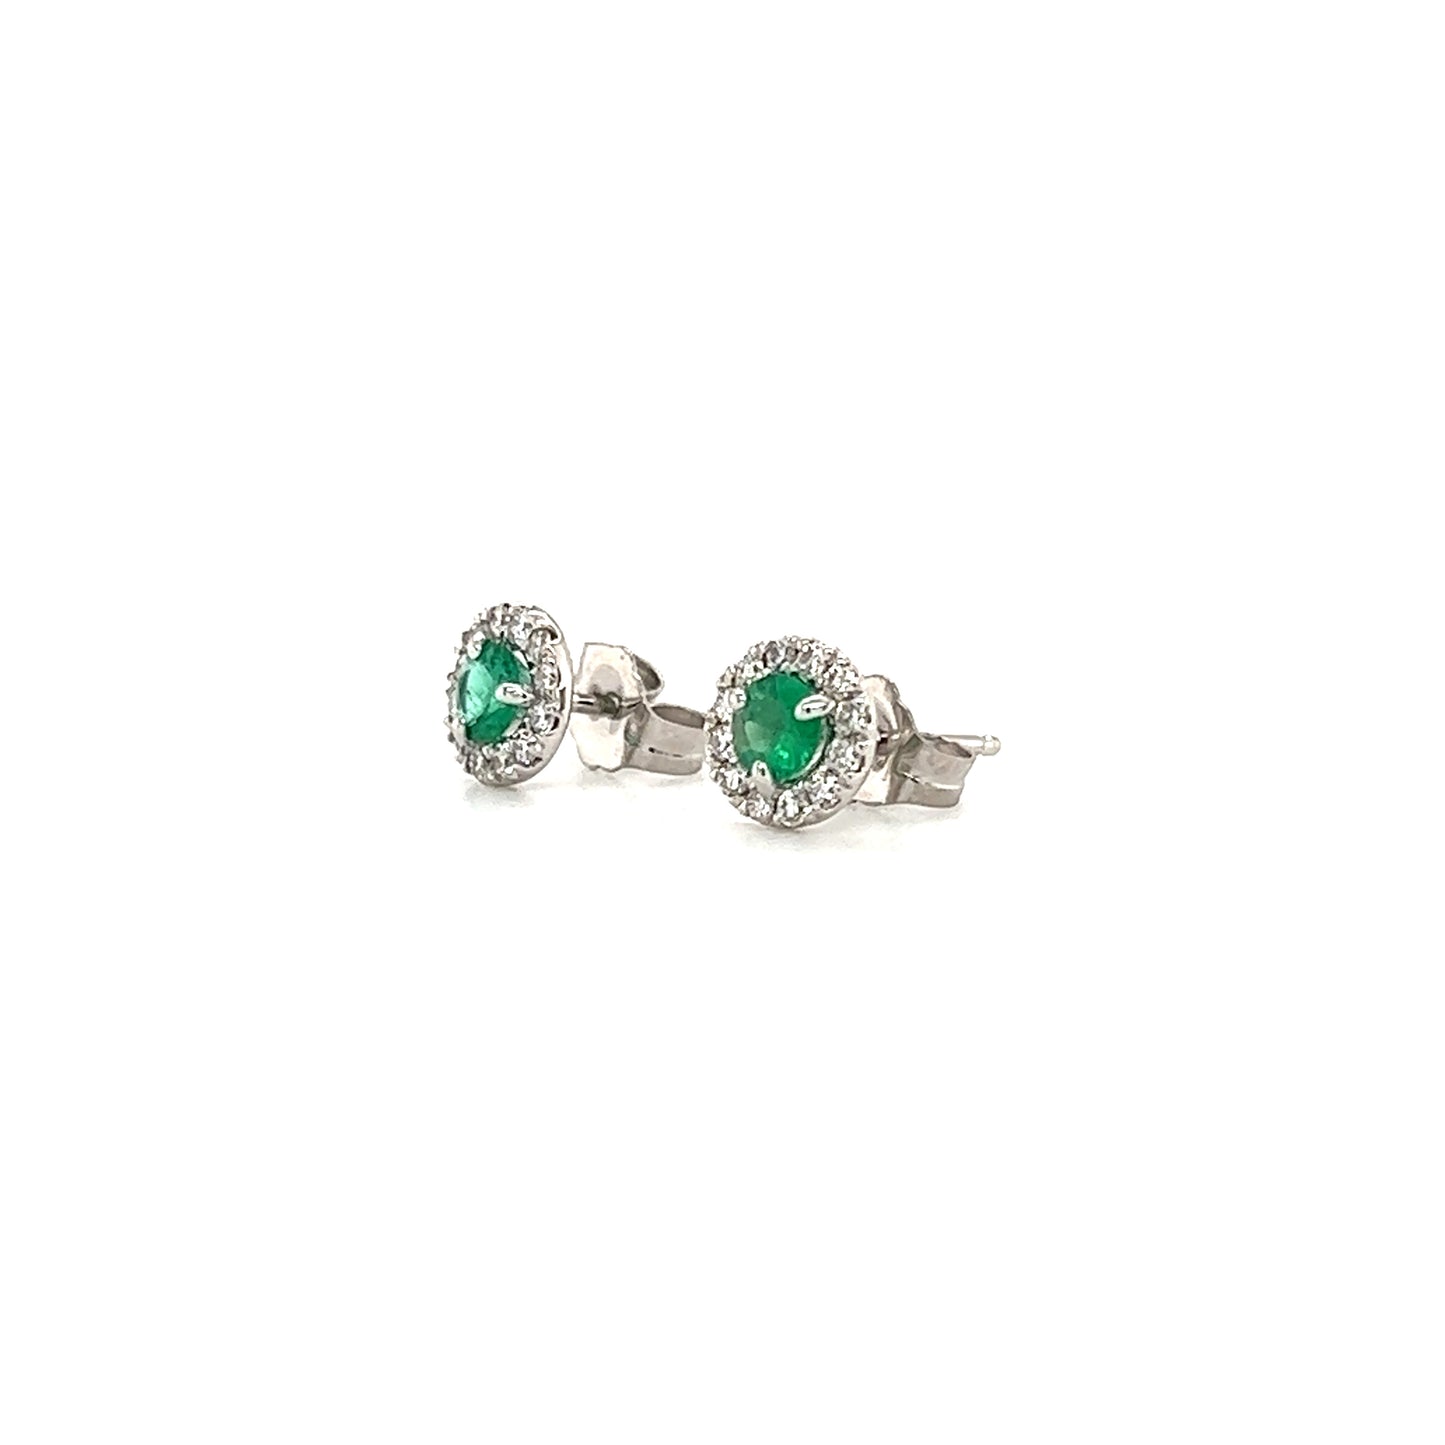 Round Emerald Stud Earrings with Diamond Halo in 14K White Gold Left Side View